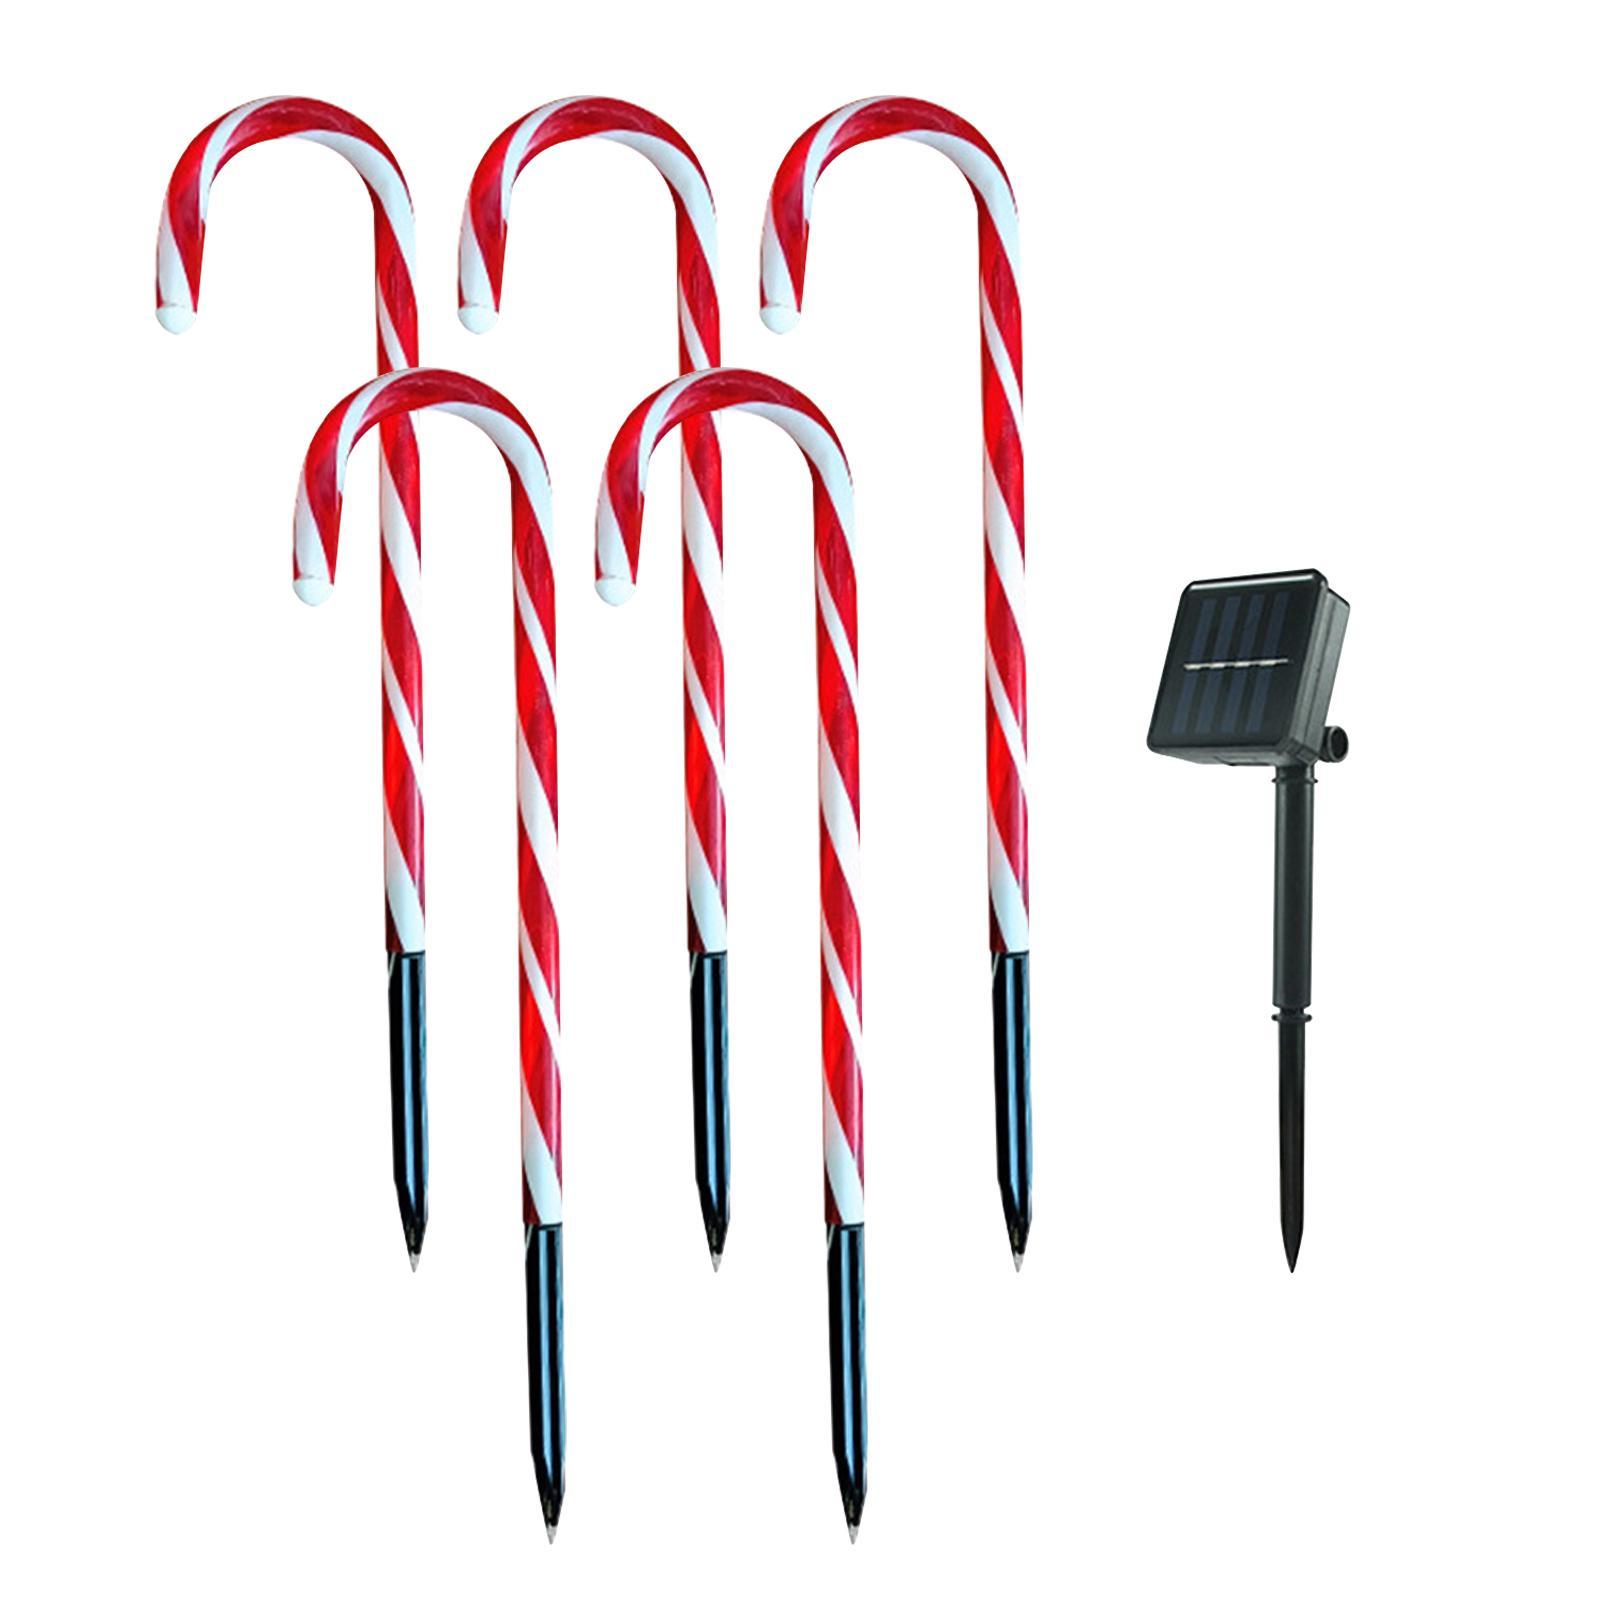 Christmas LED Lamps Candy Cane Solar Operated Lights for Holiday Patio